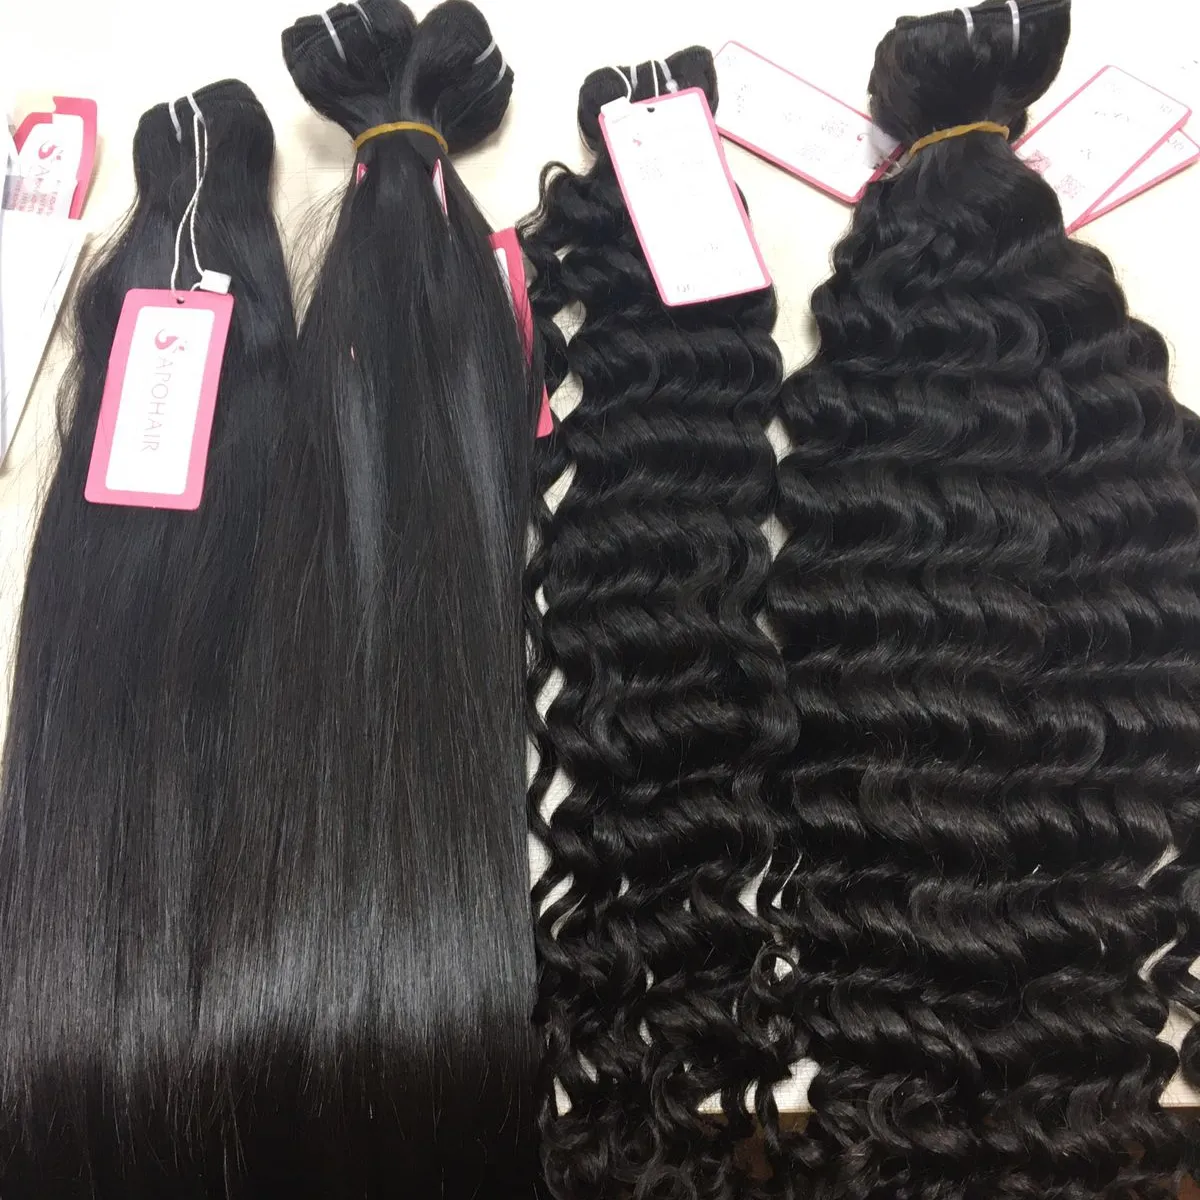 Wholesale Straight/Wavy/Curly Virgin Human Hair Bundles Extensions 100% Machine Sewing Double Wefted Extension